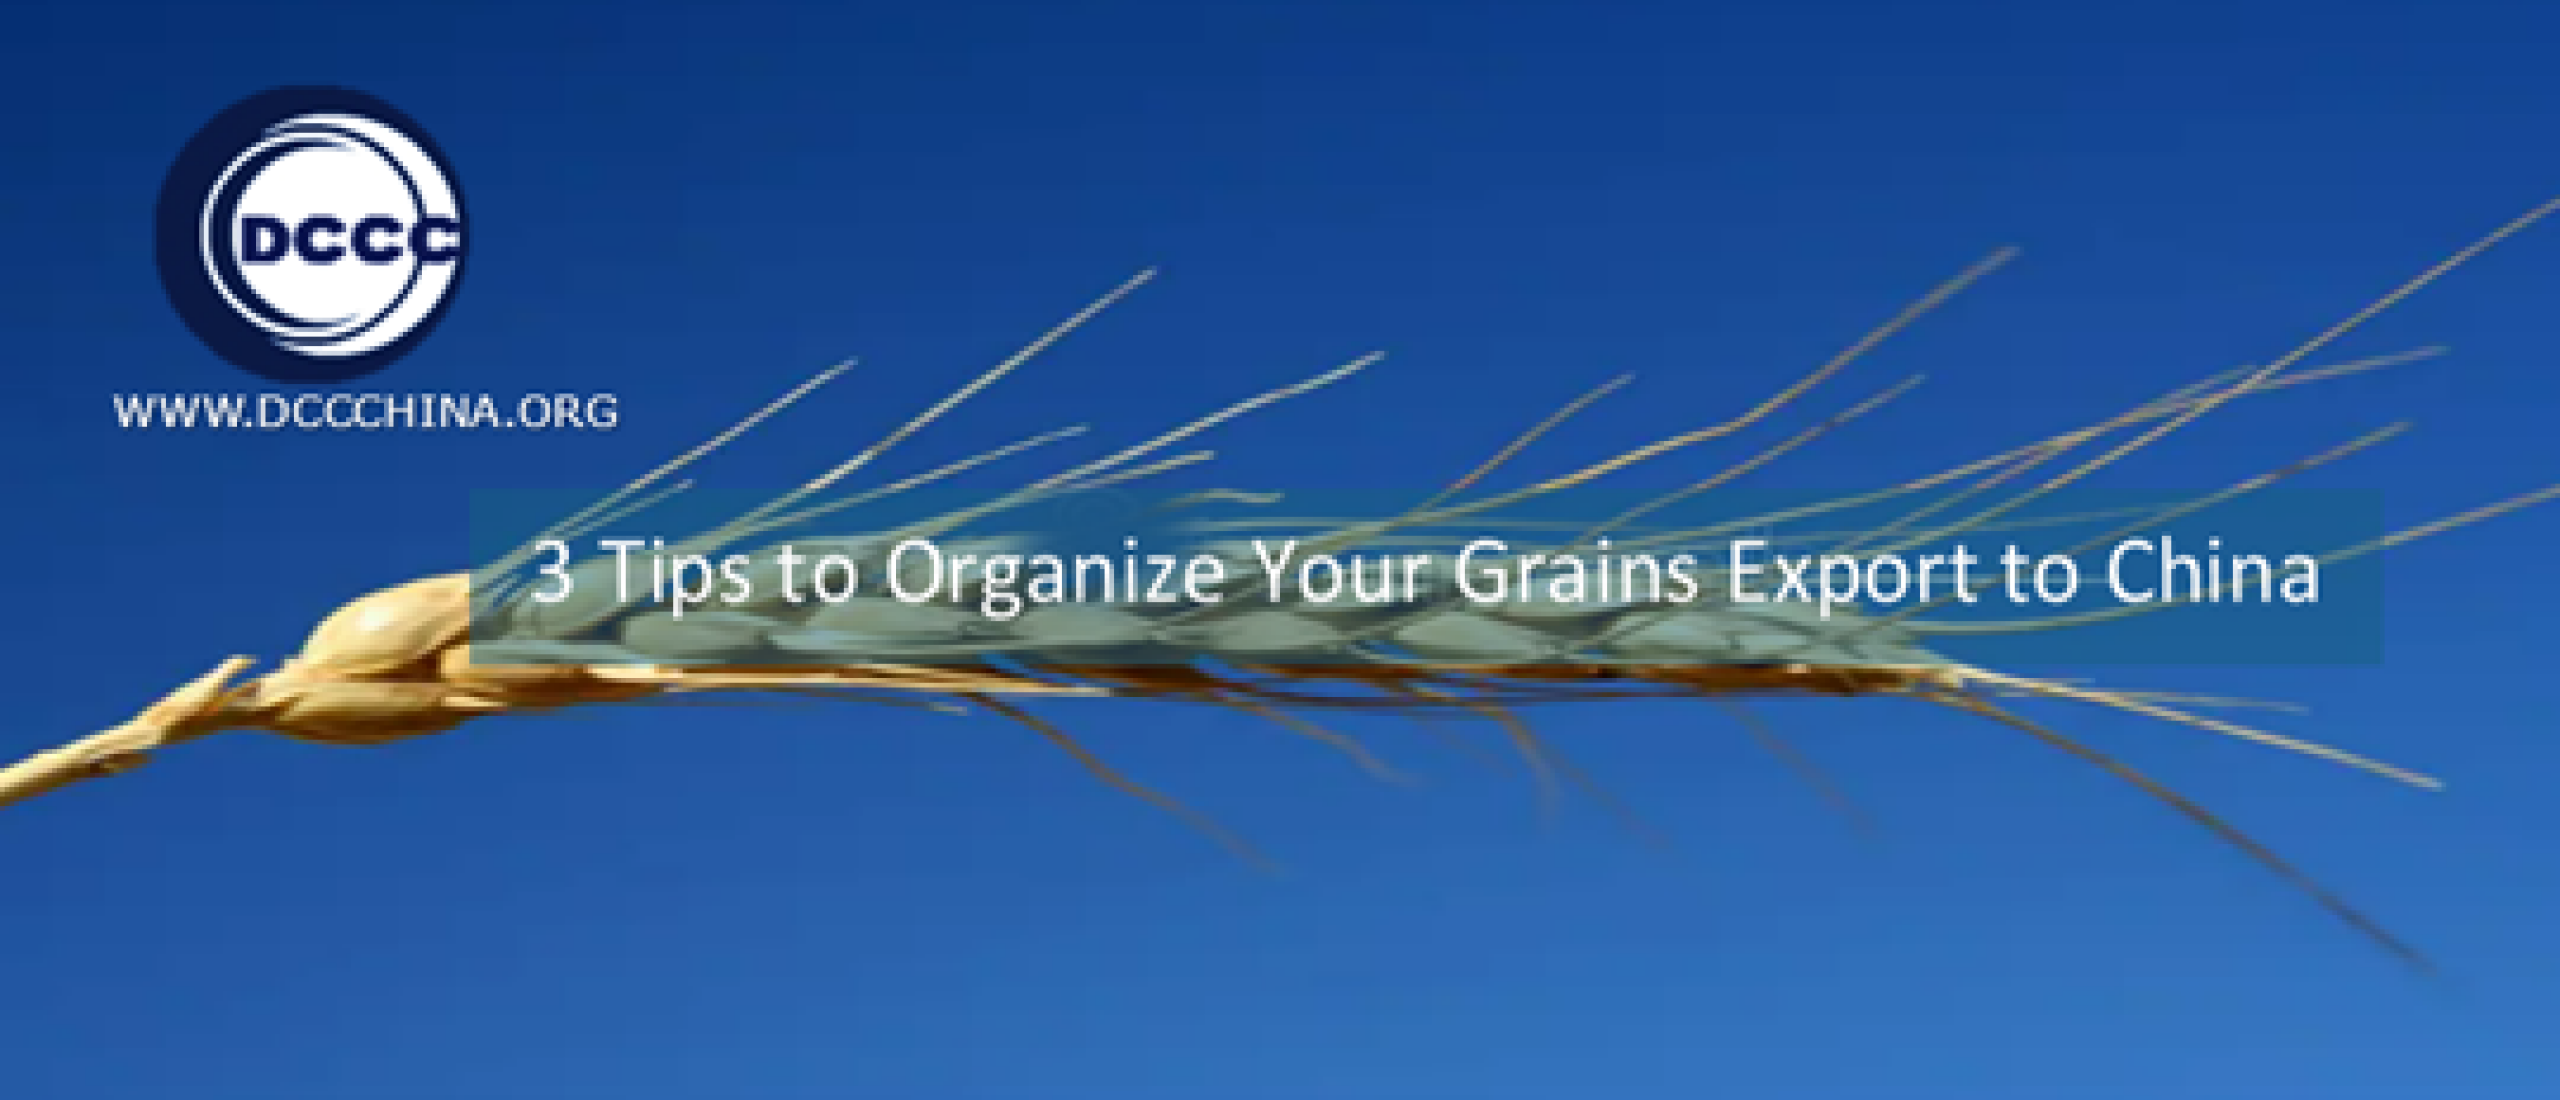 3 Tips to Organize Your Grains Export to China